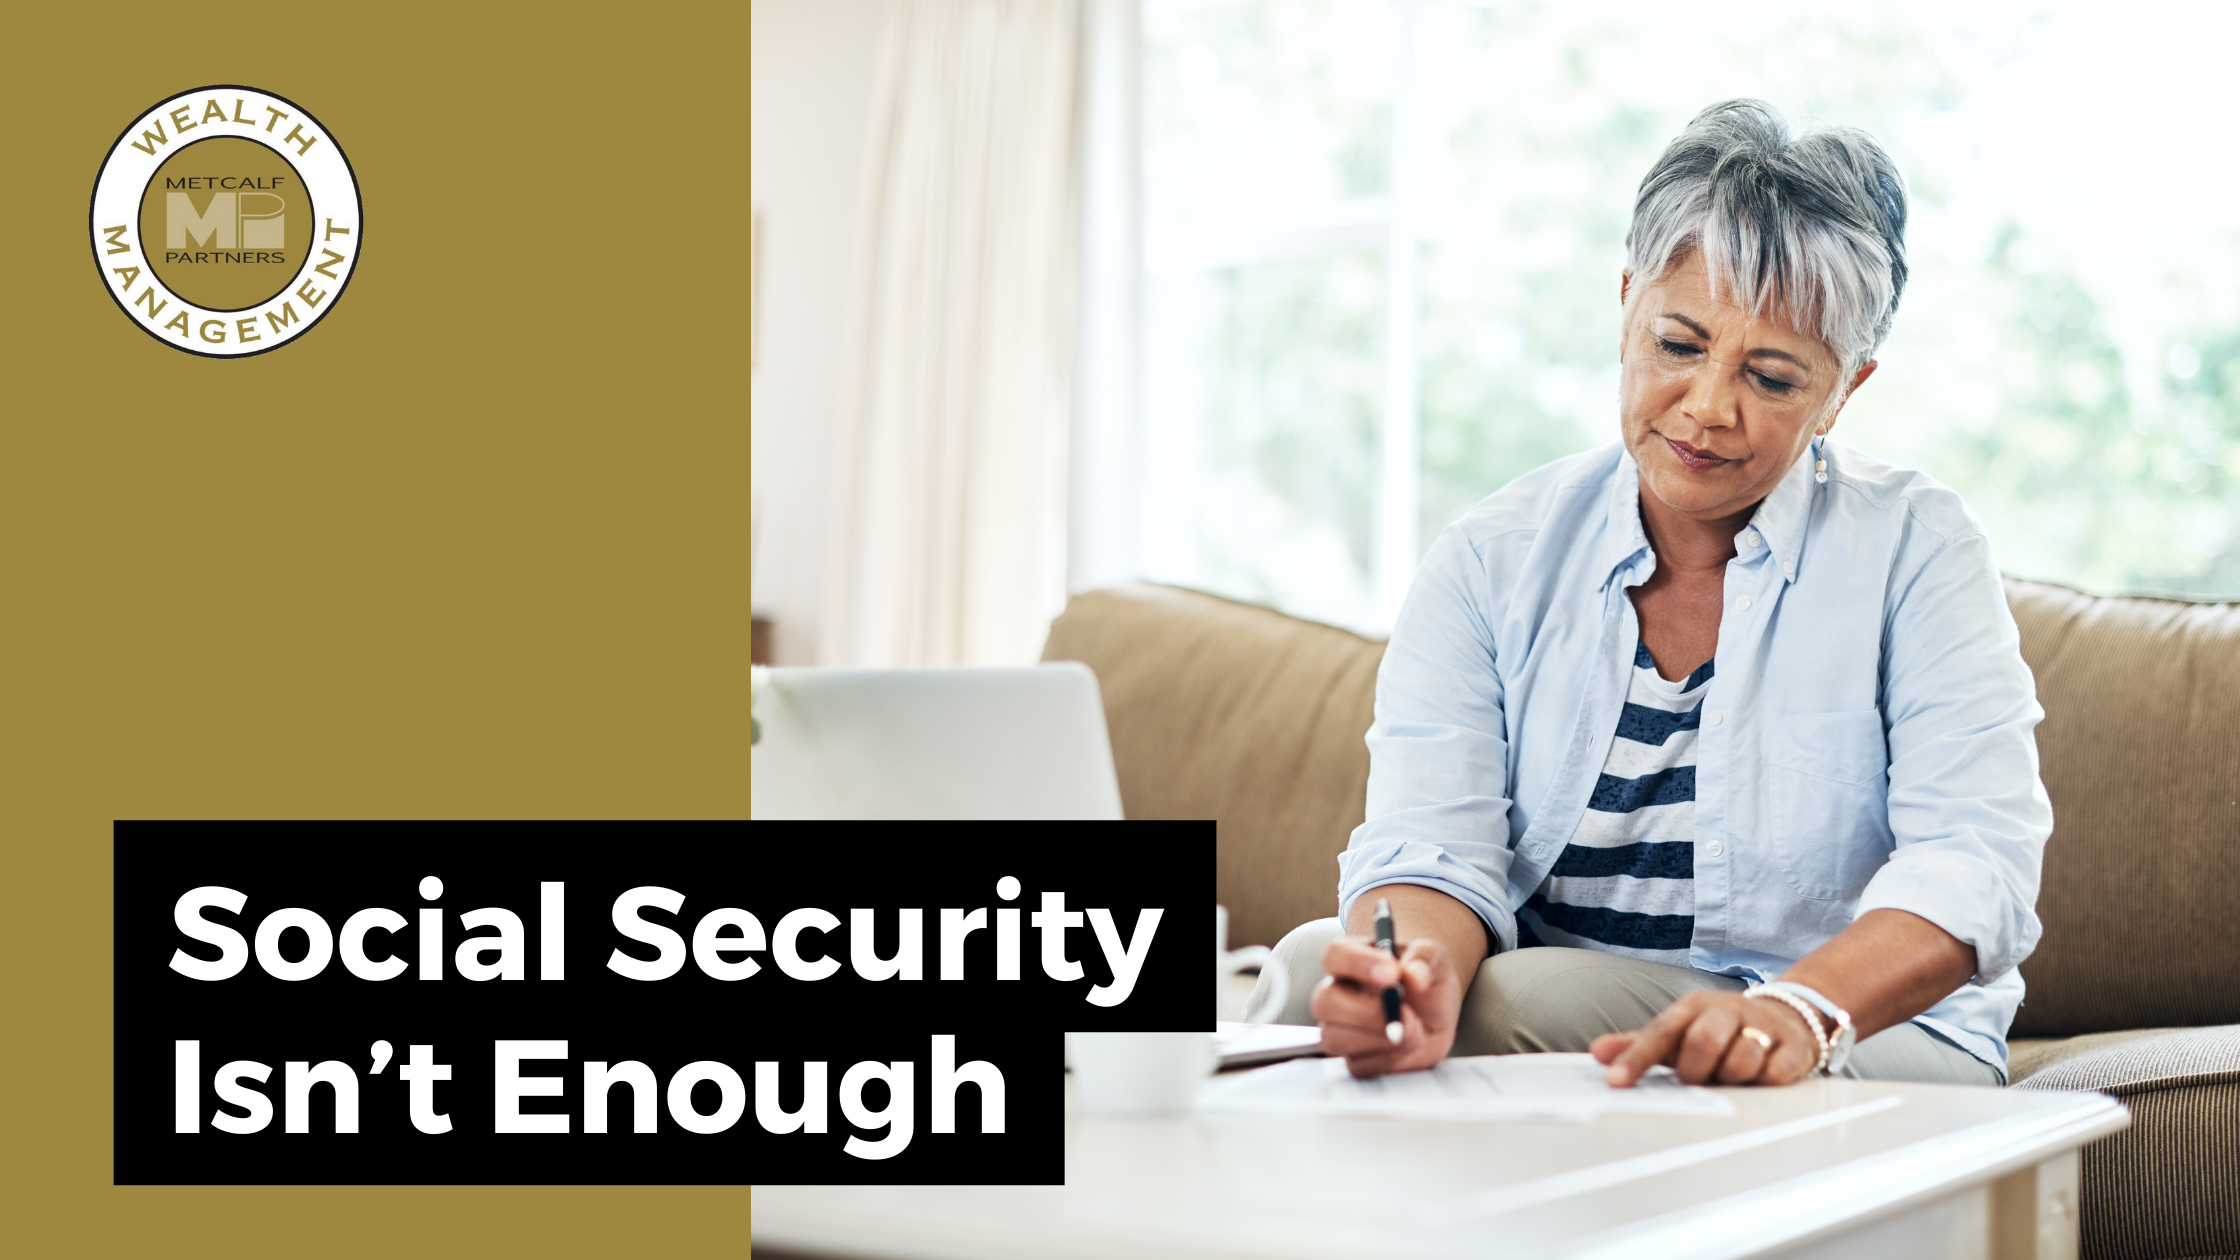 Featured image for “Social Security Isn’t Enough”